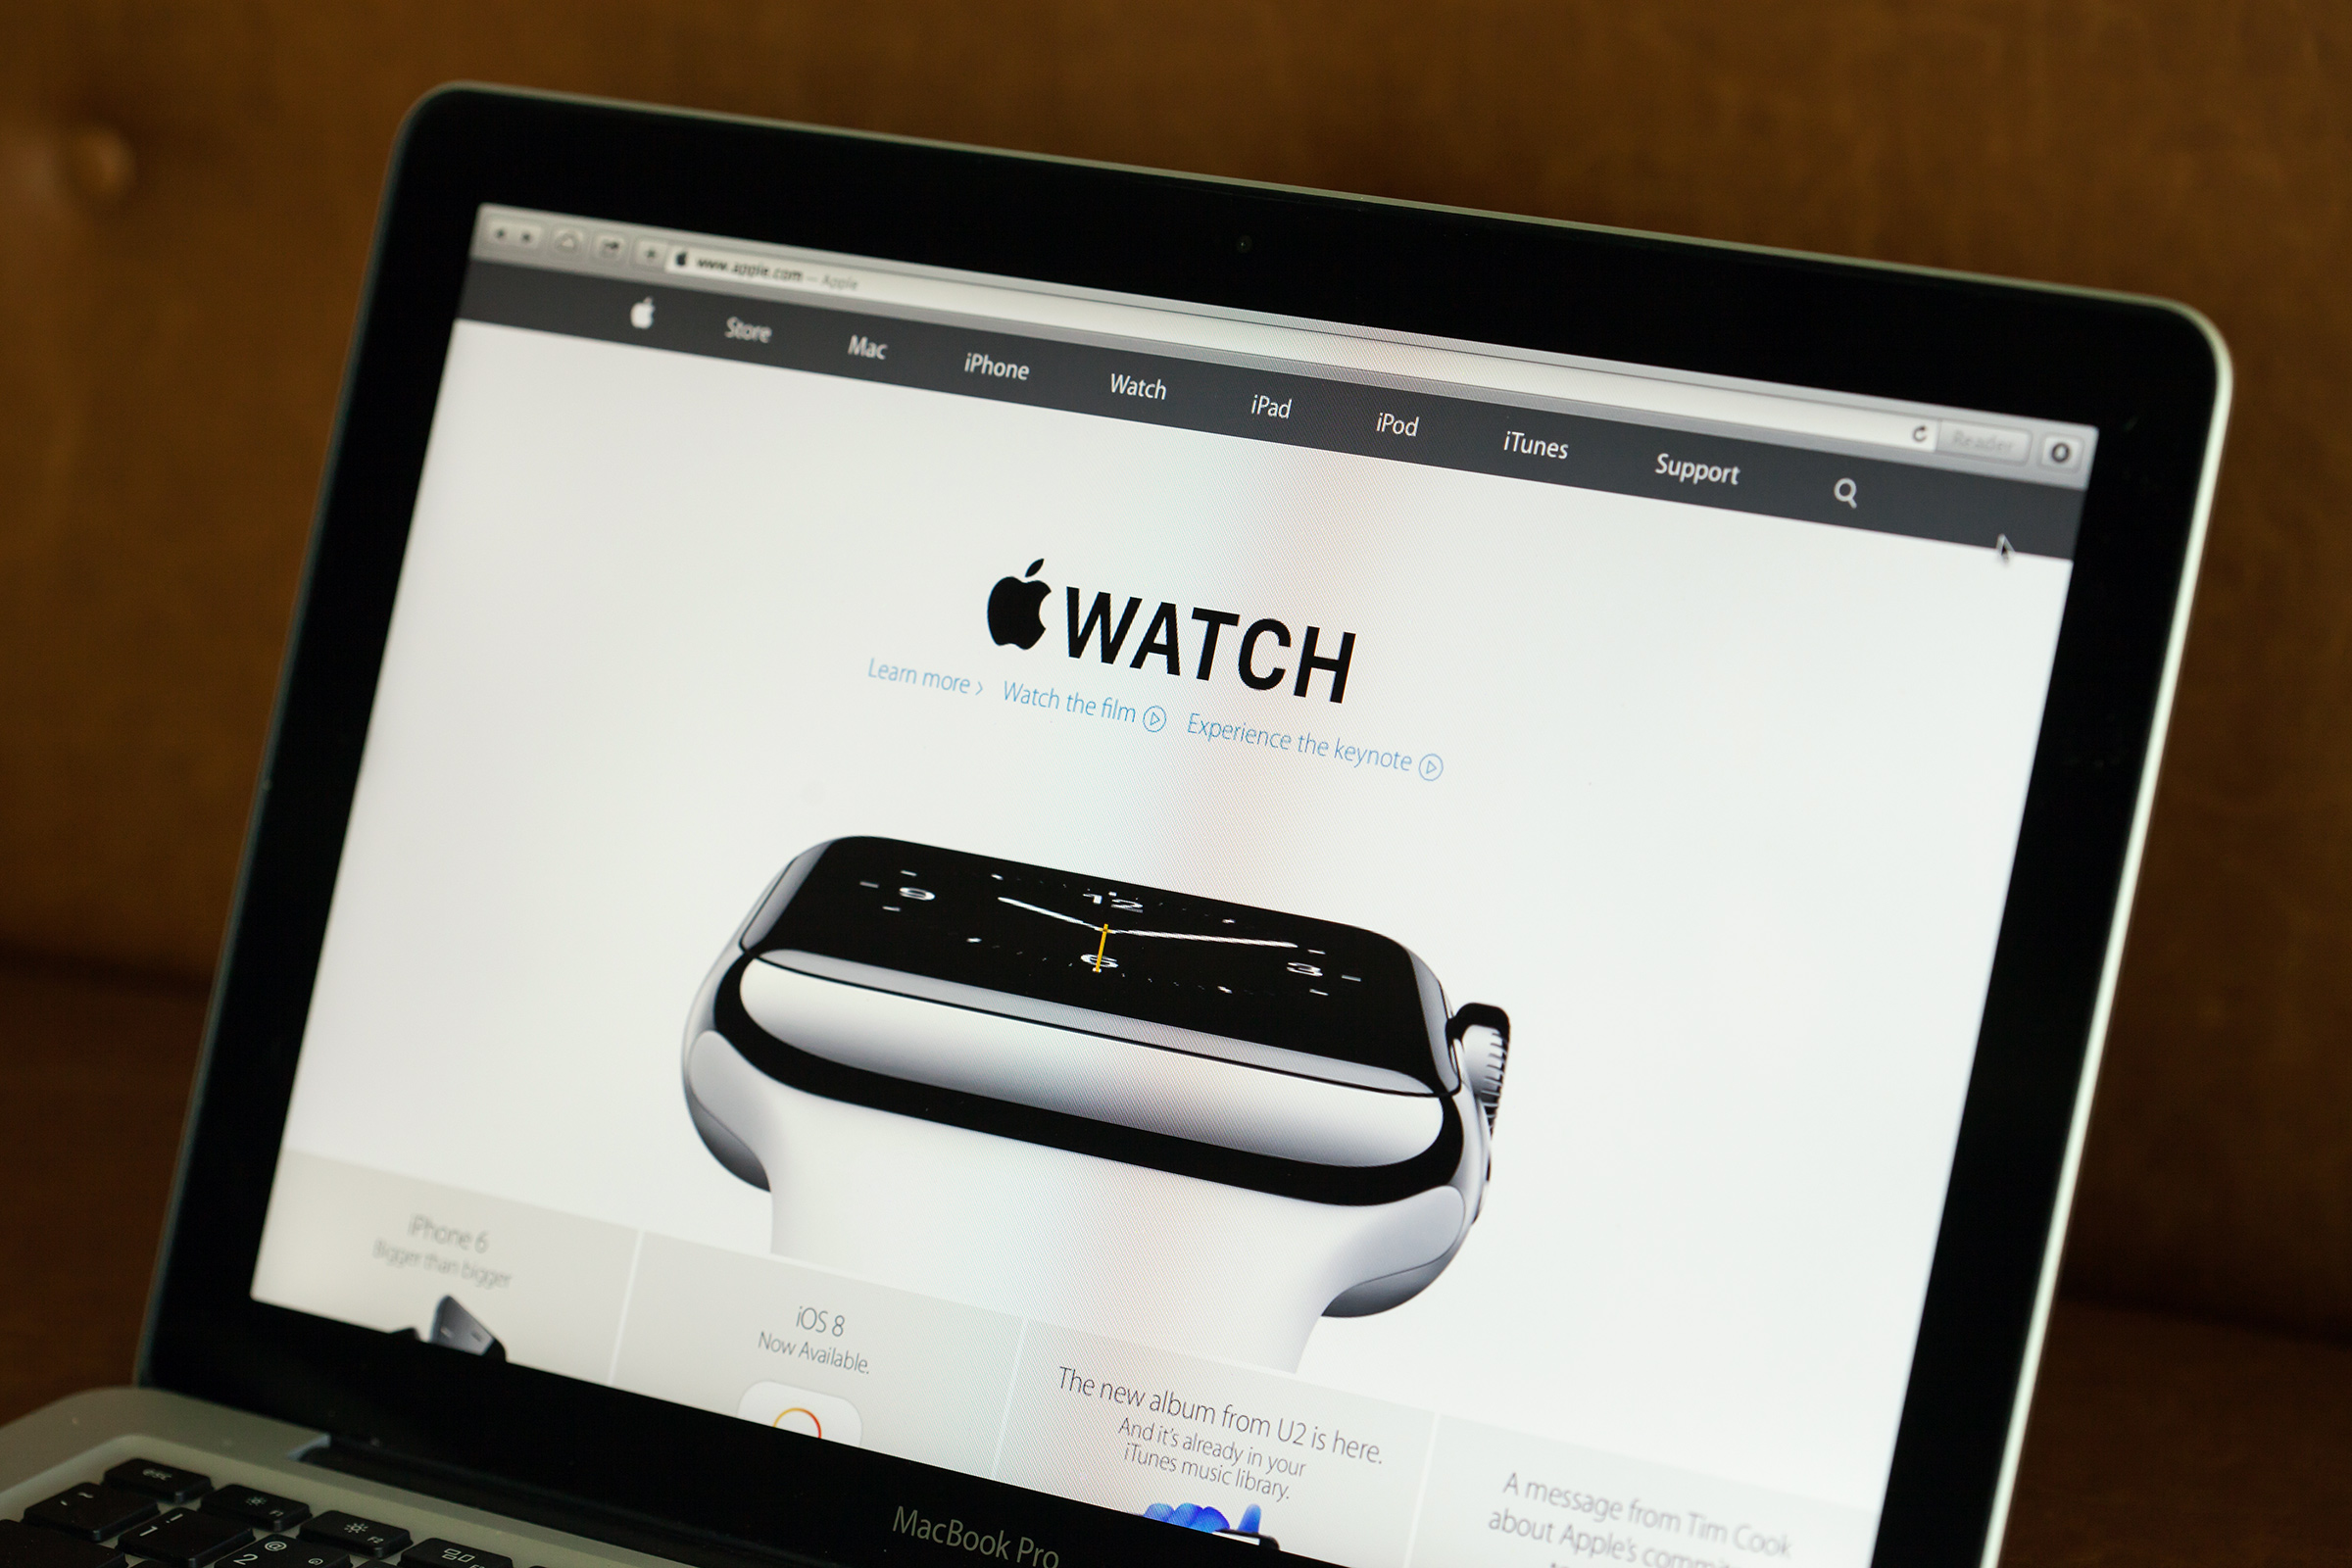 Apple sued in Europe for promoting Apple Watch on “iWatch” searches